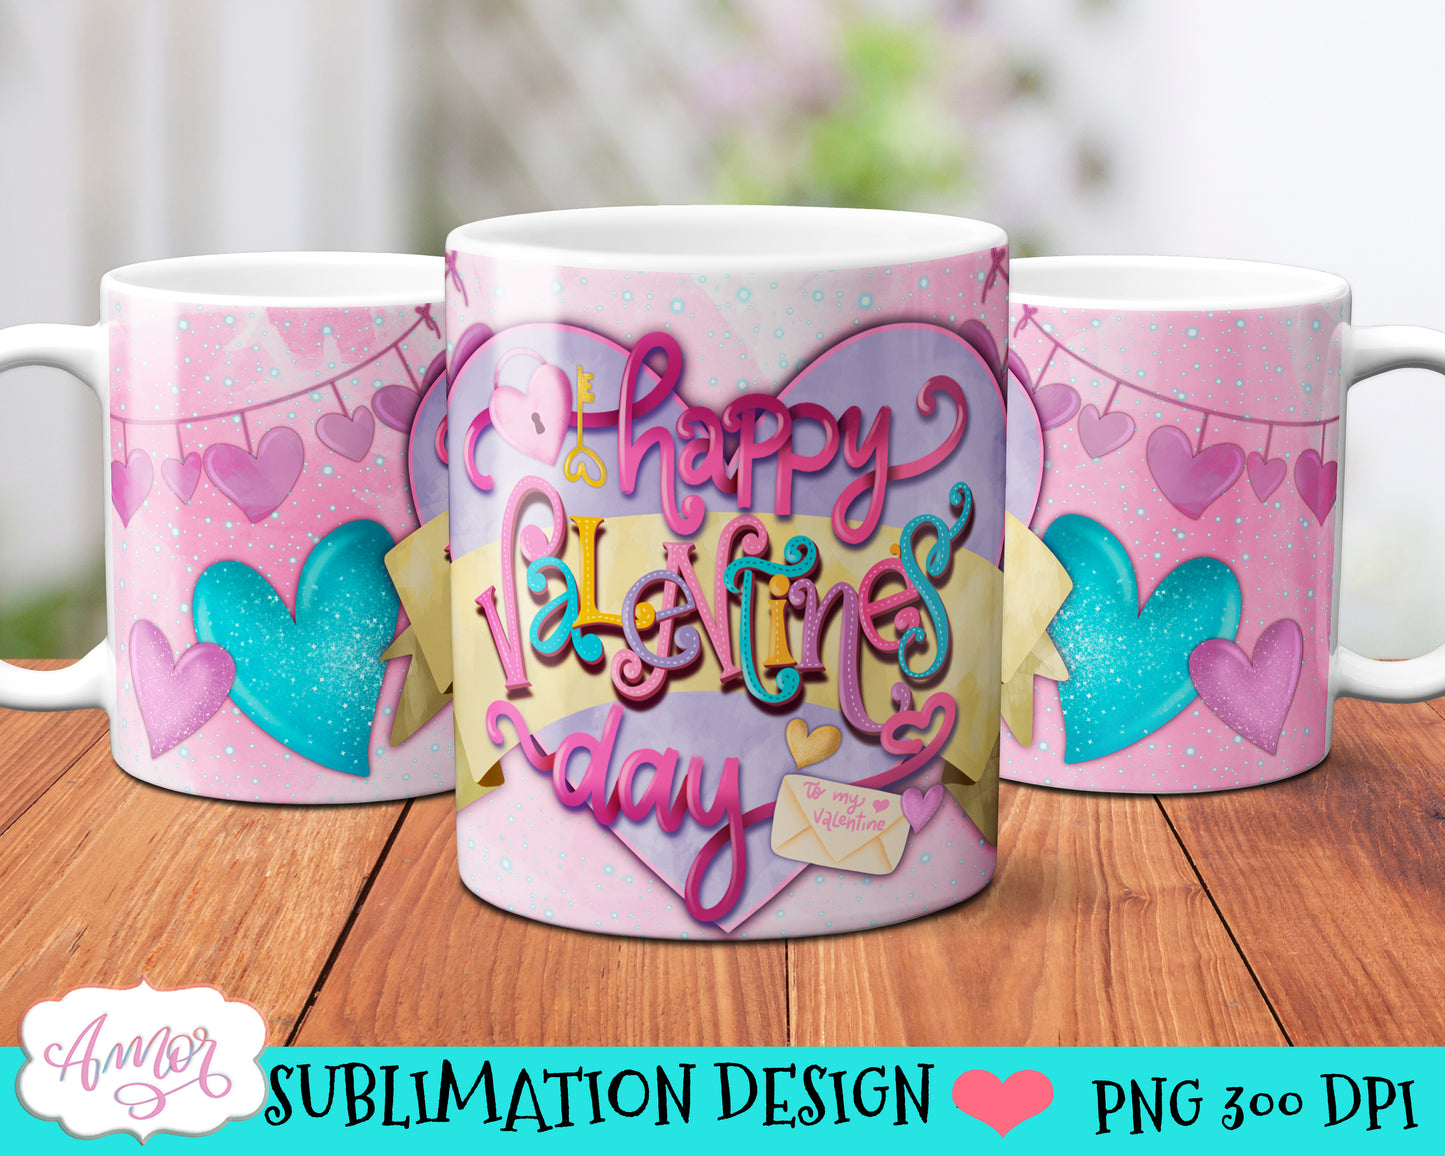 Happy Valentine's day Mug Wrap PNG for Sublimation